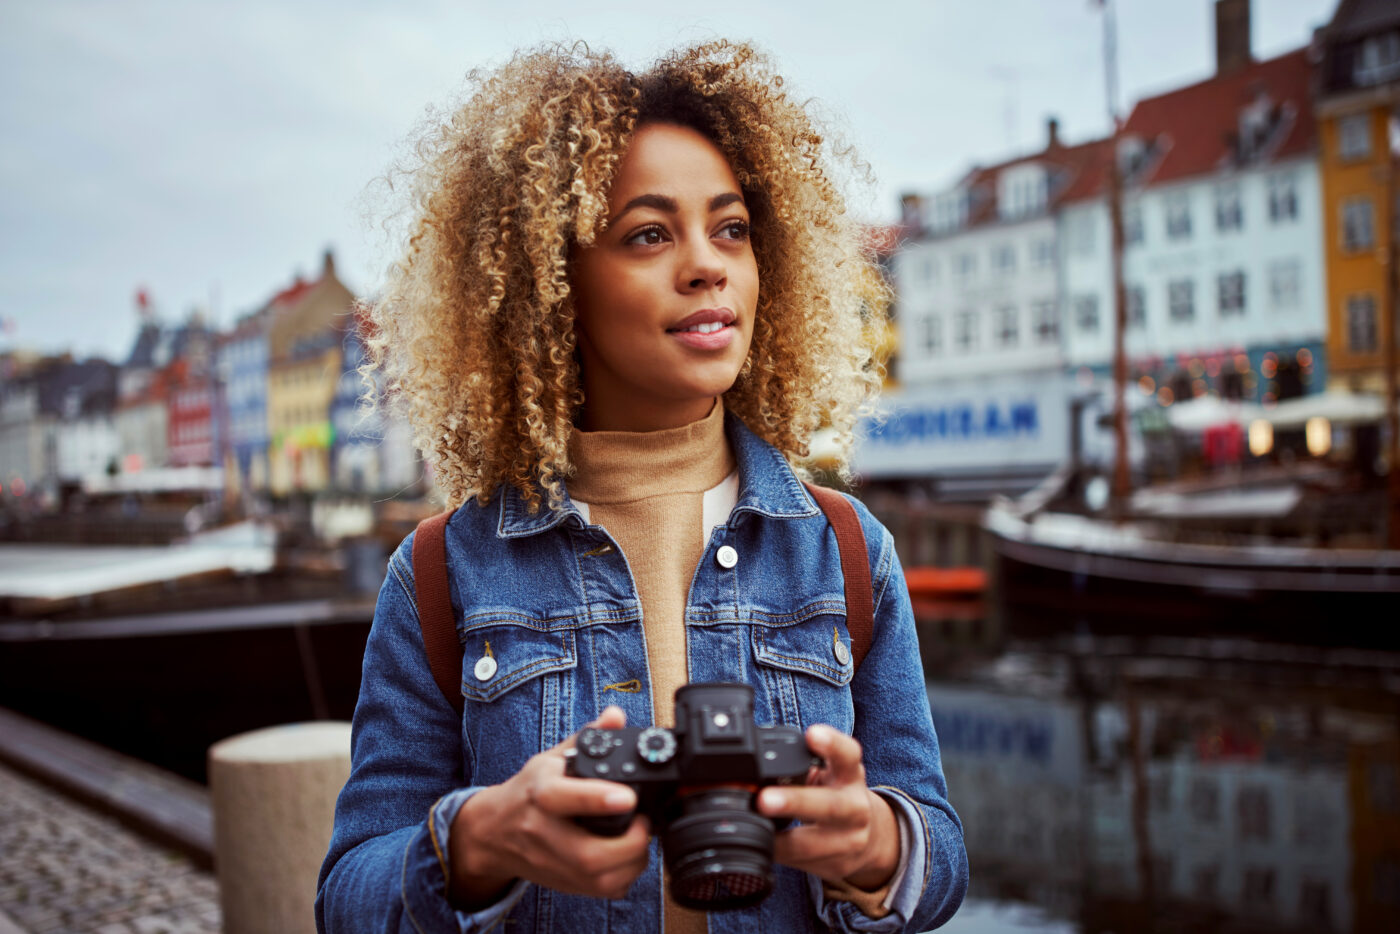 Gen Z woman on holiday using her camera